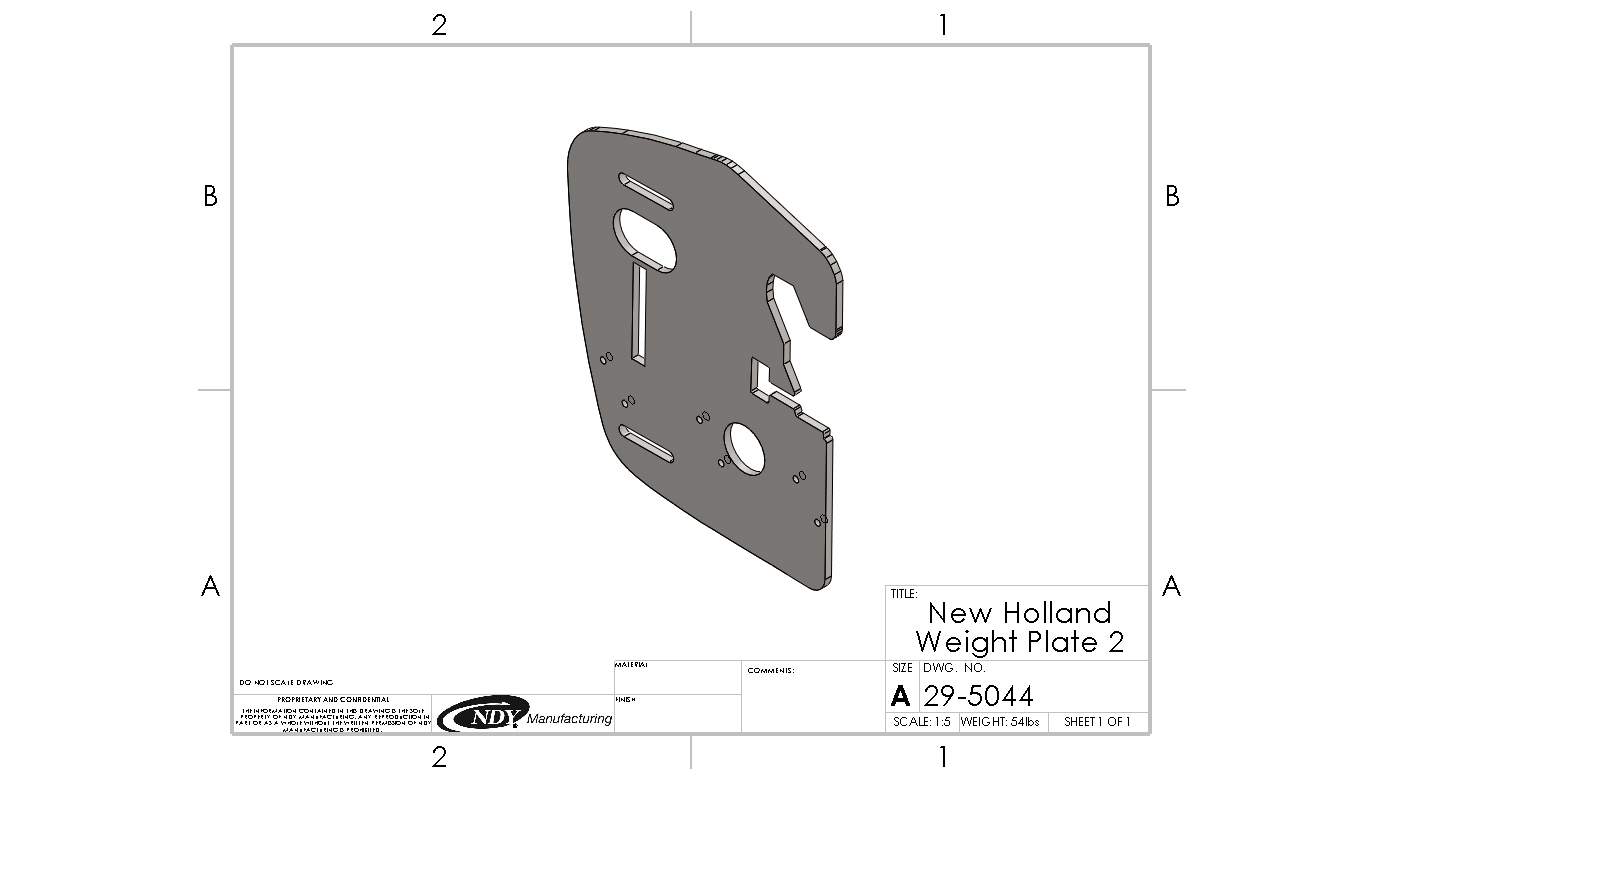 A drawing of a Rock Box Weight Plate for New Holland motorcycle.